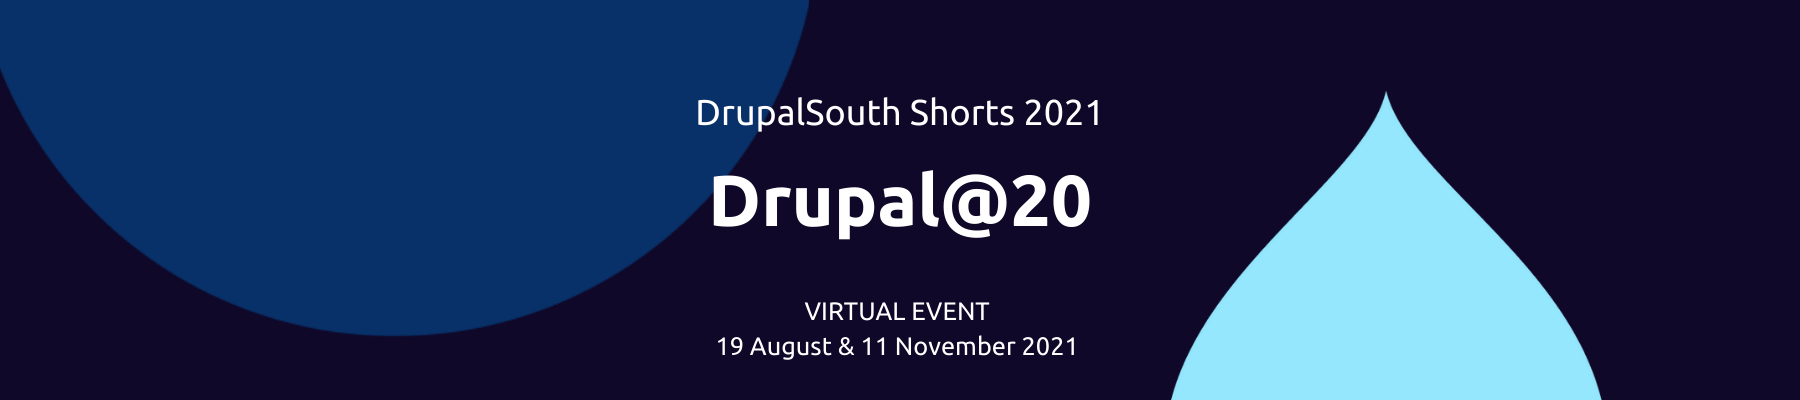 DrupalSouth 2021 banner